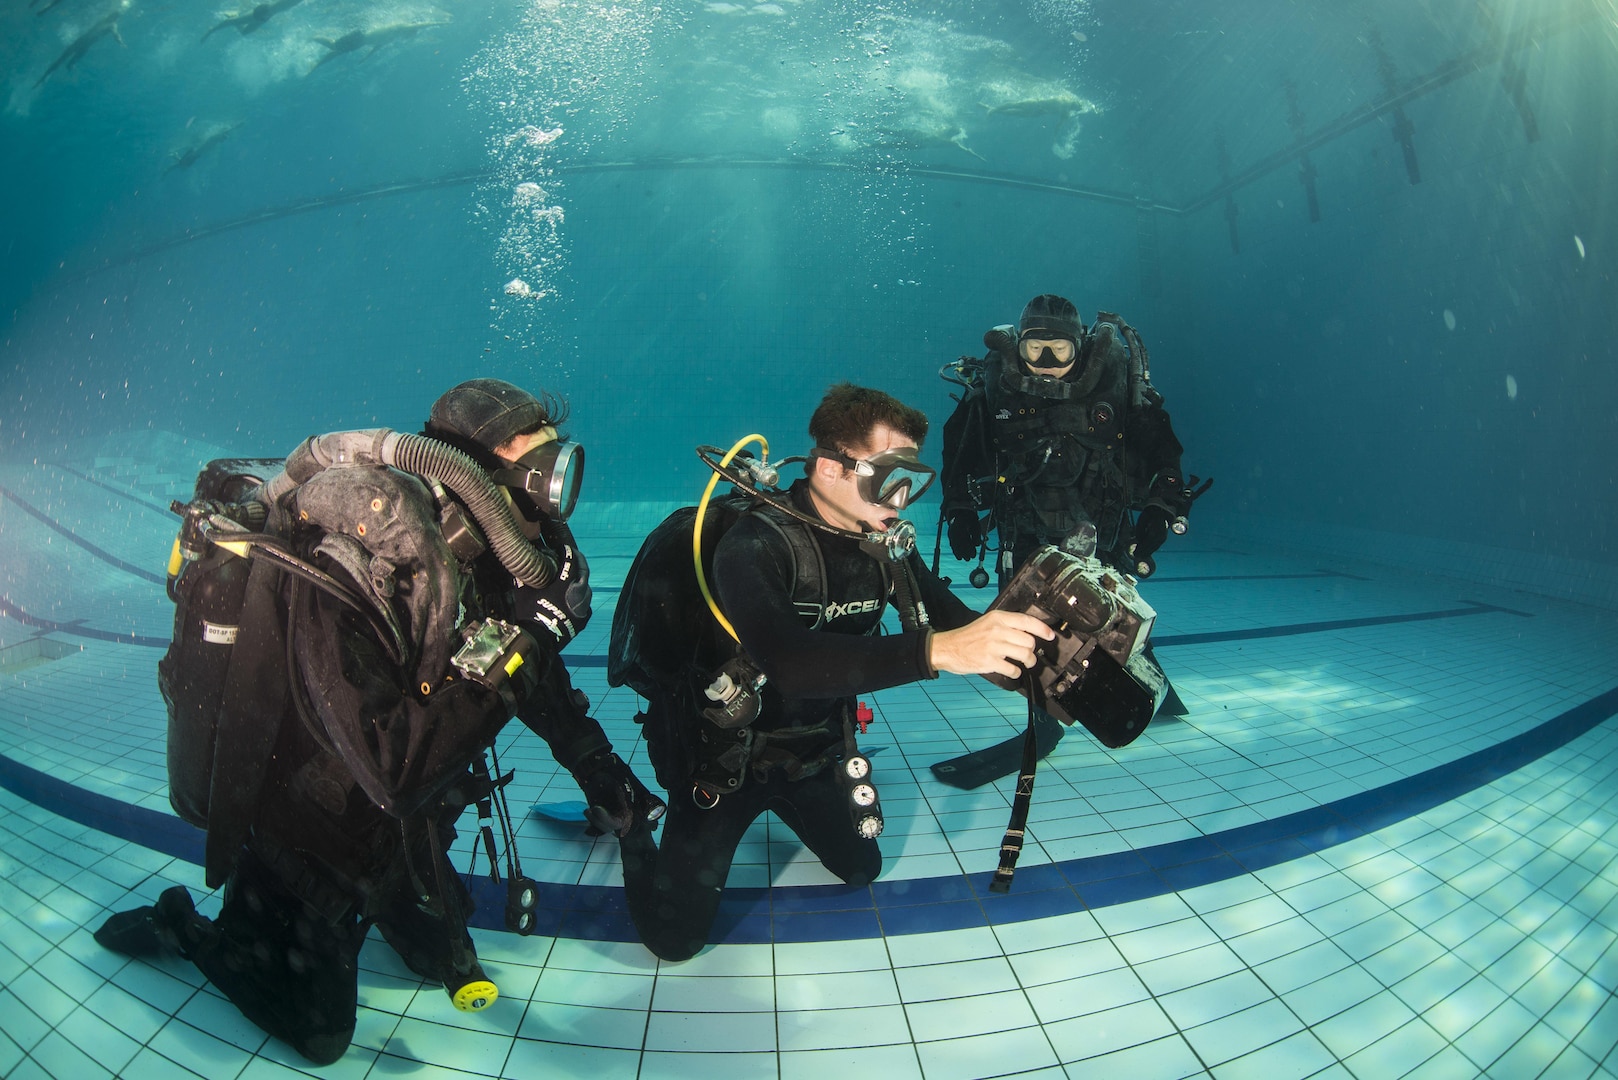 Explosive Ordnance Disposal (EOD) technician 2nd Class Andrew Dixon, center, assigned to EOD Mobile Unit (EODMU) 1, demonstrates the functions of the UIS underwater sonar system to Republic of Korea Navy UDT/SEALs during Clear Horizon 2015 on Commander Fleet Activities Chinhae.  Exercise Clear Horizon is an annual bilateral exercise between the U.S. and Republic of Korea navies that focus on increasing capabilities and coordination between ships, and aircraft in mine countermeasures in international waters surrounding the Korean peninsula.   (U.S. Navy Combat Camera Photo by Mass Communication Specialist 2nd Class Daniel Rolston/RELEASED)